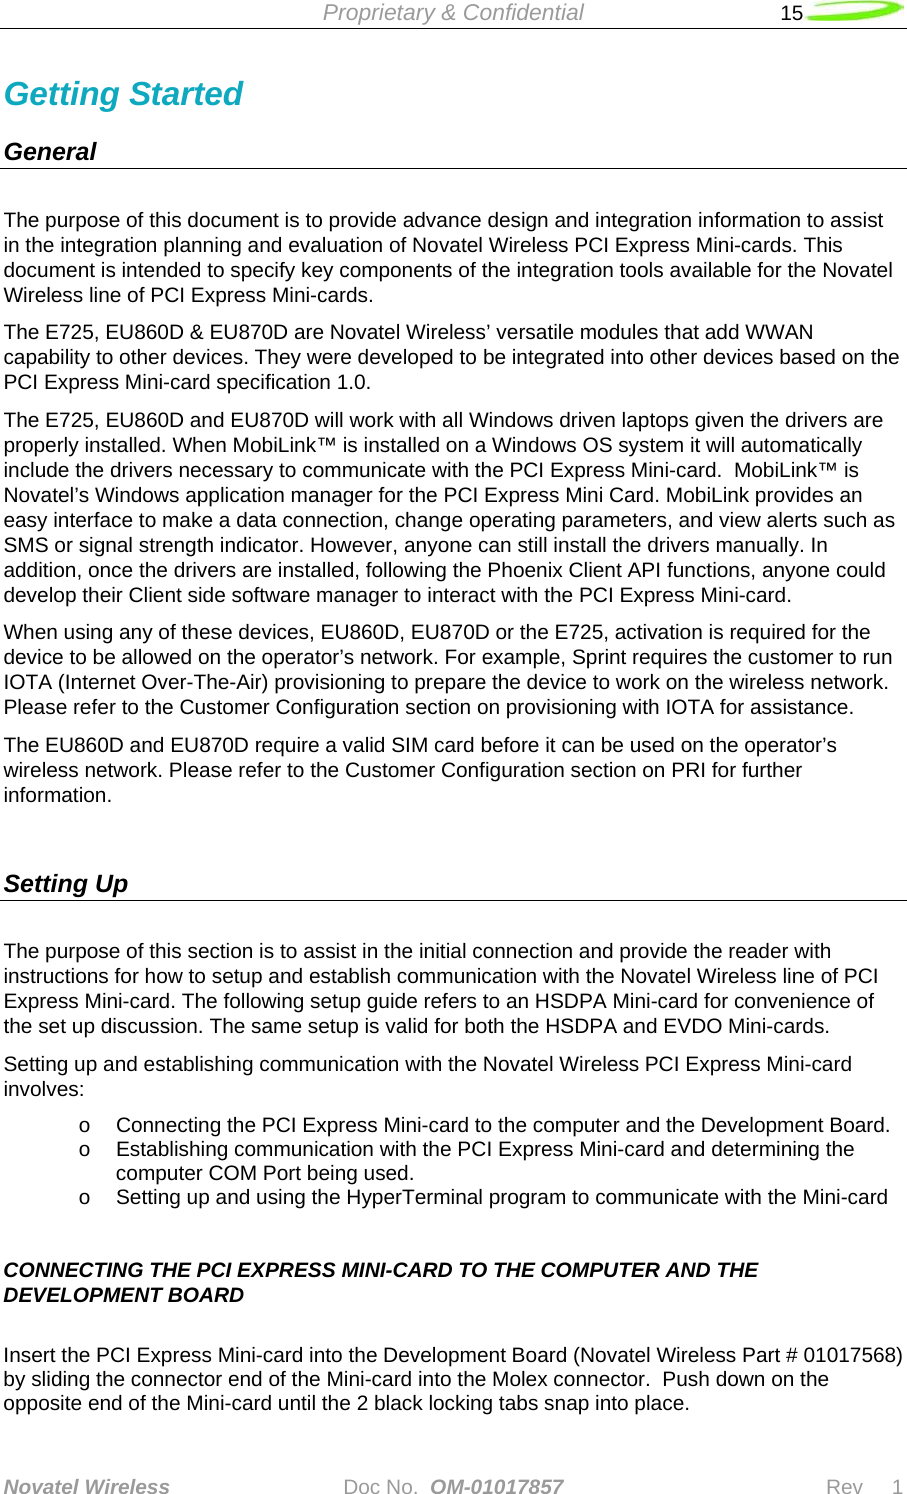  Proprietary &amp; Confidential   15   Novatel Wireless   Doc No.  OM-01017857                              Rev     1  Getting Started      General        The purpose of this document is to provide advance design and integration information to assist in the integration planning and evaluation of Novatel Wireless PCI Express Mini-cards. This document is intended to specify key components of the integration tools available for the Novatel Wireless line of PCI Express Mini-cards. The E725, EU860D &amp; EU870D are Novatel Wireless’ versatile modules that add WWAN capability to other devices. They were developed to be integrated into other devices based on the PCI Express Mini-card specification 1.0.   The E725, EU860D and EU870D will work with all Windows driven laptops given the drivers are properly installed. When MobiLink™ is installed on a Windows OS system it will automatically include the drivers necessary to communicate with the PCI Express Mini-card.  MobiLink™ is Novatel’s Windows application manager for the PCI Express Mini Card. MobiLink provides an easy interface to make a data connection, change operating parameters, and view alerts such as SMS or signal strength indicator. However, anyone can still install the drivers manually. In addition, once the drivers are installed, following the Phoenix Client API functions, anyone could develop their Client side software manager to interact with the PCI Express Mini-card. When using any of these devices, EU860D, EU870D or the E725, activation is required for the device to be allowed on the operator’s network. For example, Sprint requires the customer to run IOTA (Internet Over-The-Air) provisioning to prepare the device to work on the wireless network. Please refer to the Customer Configuration section on provisioning with IOTA for assistance. The EU860D and EU870D require a valid SIM card before it can be used on the operator’s wireless network. Please refer to the Customer Configuration section on PRI for further information.   Setting Up The purpose of this section is to assist in the initial connection and provide the reader with instructions for how to setup and establish communication with the Novatel Wireless line of PCI Express Mini-card. The following setup guide refers to an HSDPA Mini-card for convenience of the set up discussion. The same setup is valid for both the HSDPA and EVDO Mini-cards.  Setting up and establishing communication with the Novatel Wireless PCI Express Mini-card involves: o  Connecting the PCI Express Mini-card to the computer and the Development Board. o  Establishing communication with the PCI Express Mini-card and determining the computer COM Port being used. o  Setting up and using the HyperTerminal program to communicate with the Mini-card     CONNECTING THE PCI EXPRESS MINI-CARD TO THE COMPUTER AND THE DEVELOPMENT BOARD  Insert the PCI Express Mini-card into the Development Board (Novatel Wireless Part # 01017568) by sliding the connector end of the Mini-card into the Molex connector.  Push down on the opposite end of the Mini-card until the 2 black locking tabs snap into place. 